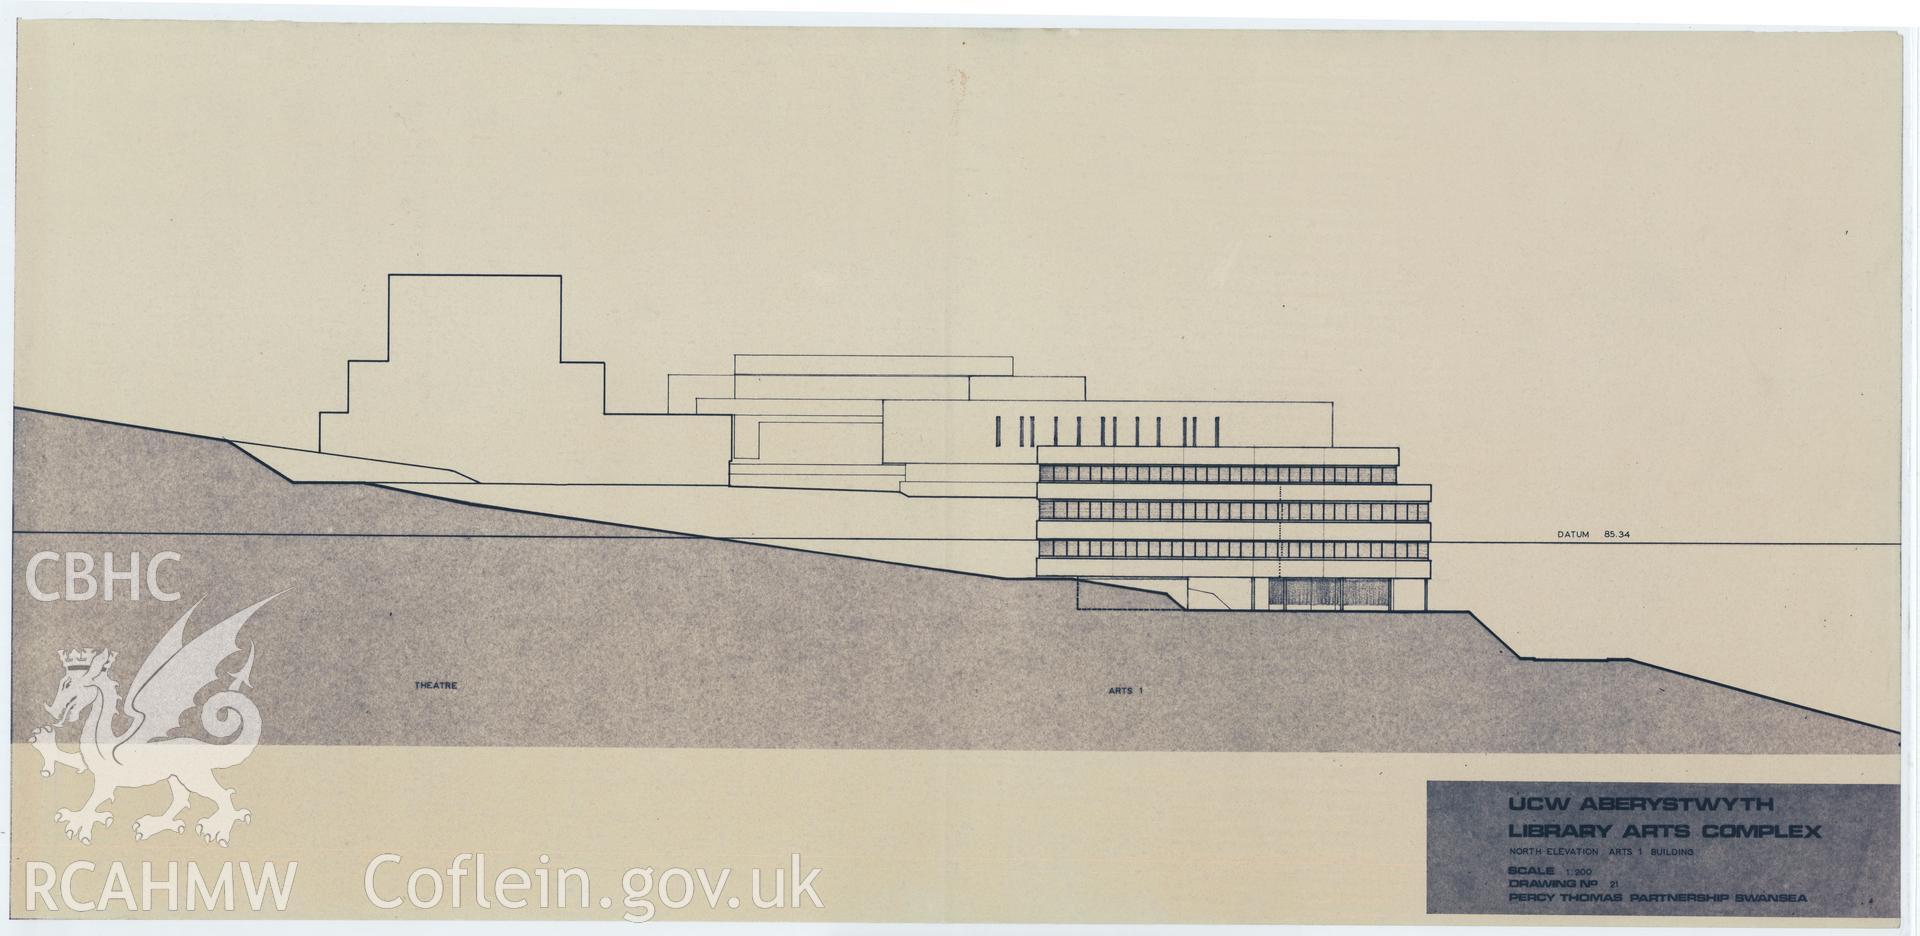 Digital copy of Drawing No 21, north elevation arts 1 building at the proposed Library Arts Complex at University College Aberystwyth, produced by Percy Thomas Partnership. Scale 1:200.